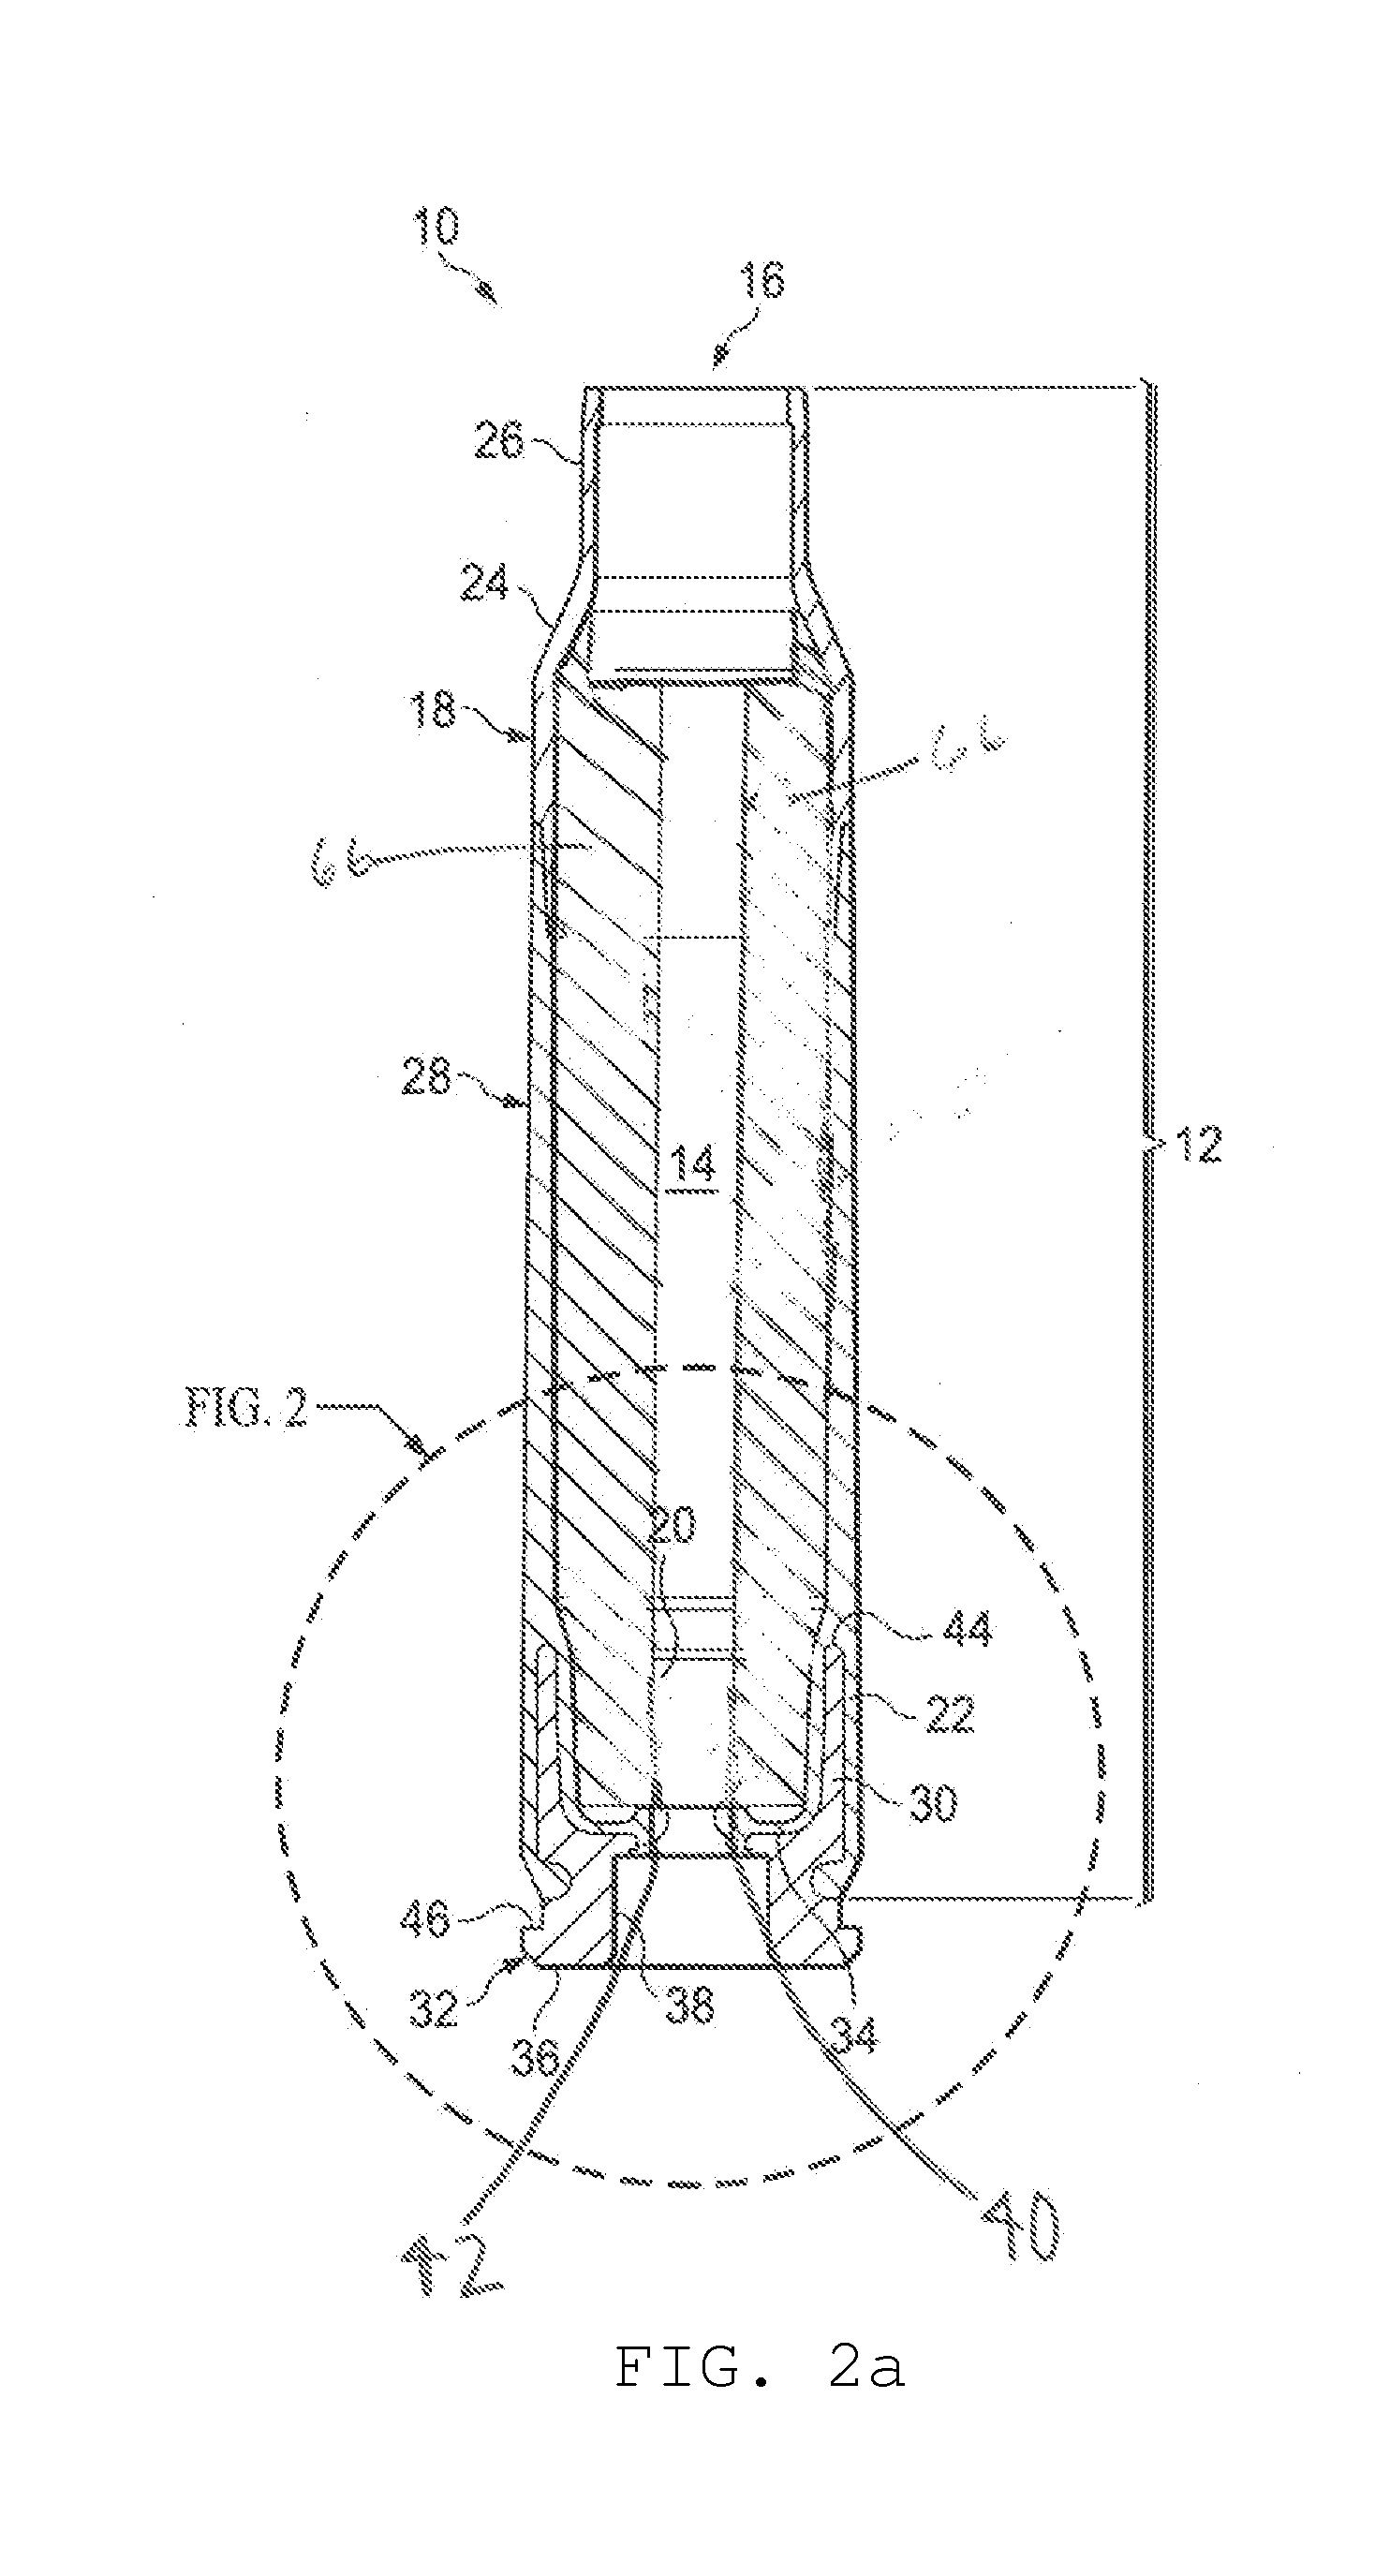 Method of making a polymeric subsonic ammunition cartridge